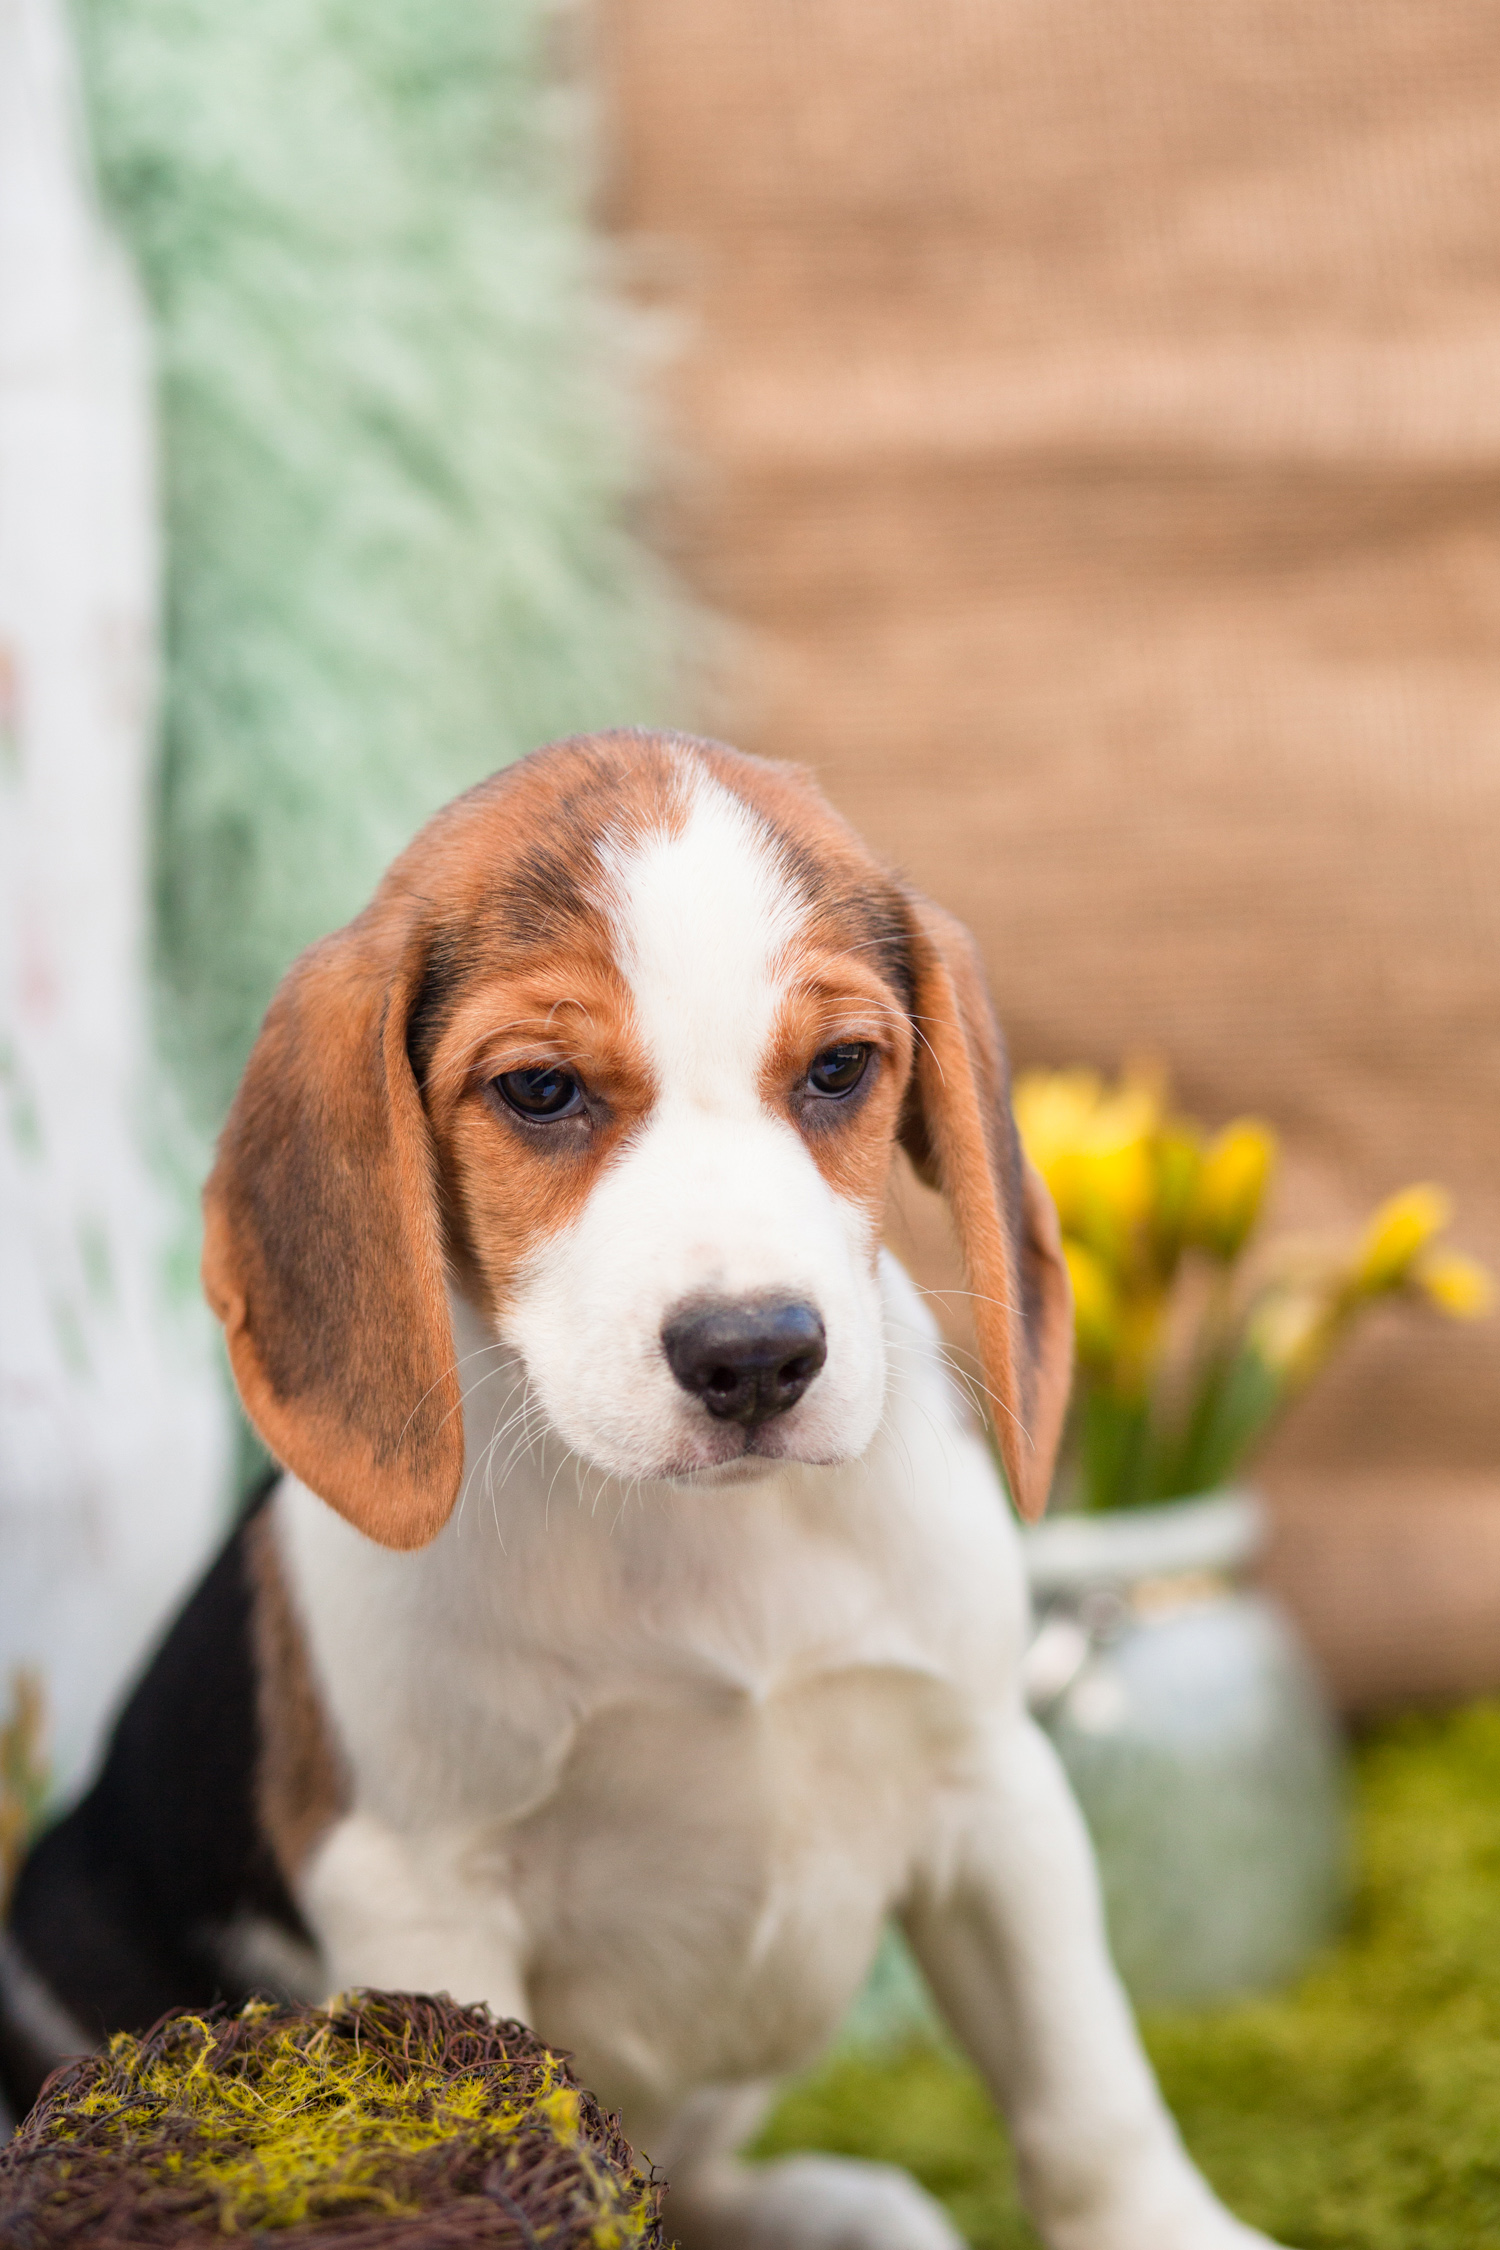 redstagdesign Where To Buy Beagle Puppies